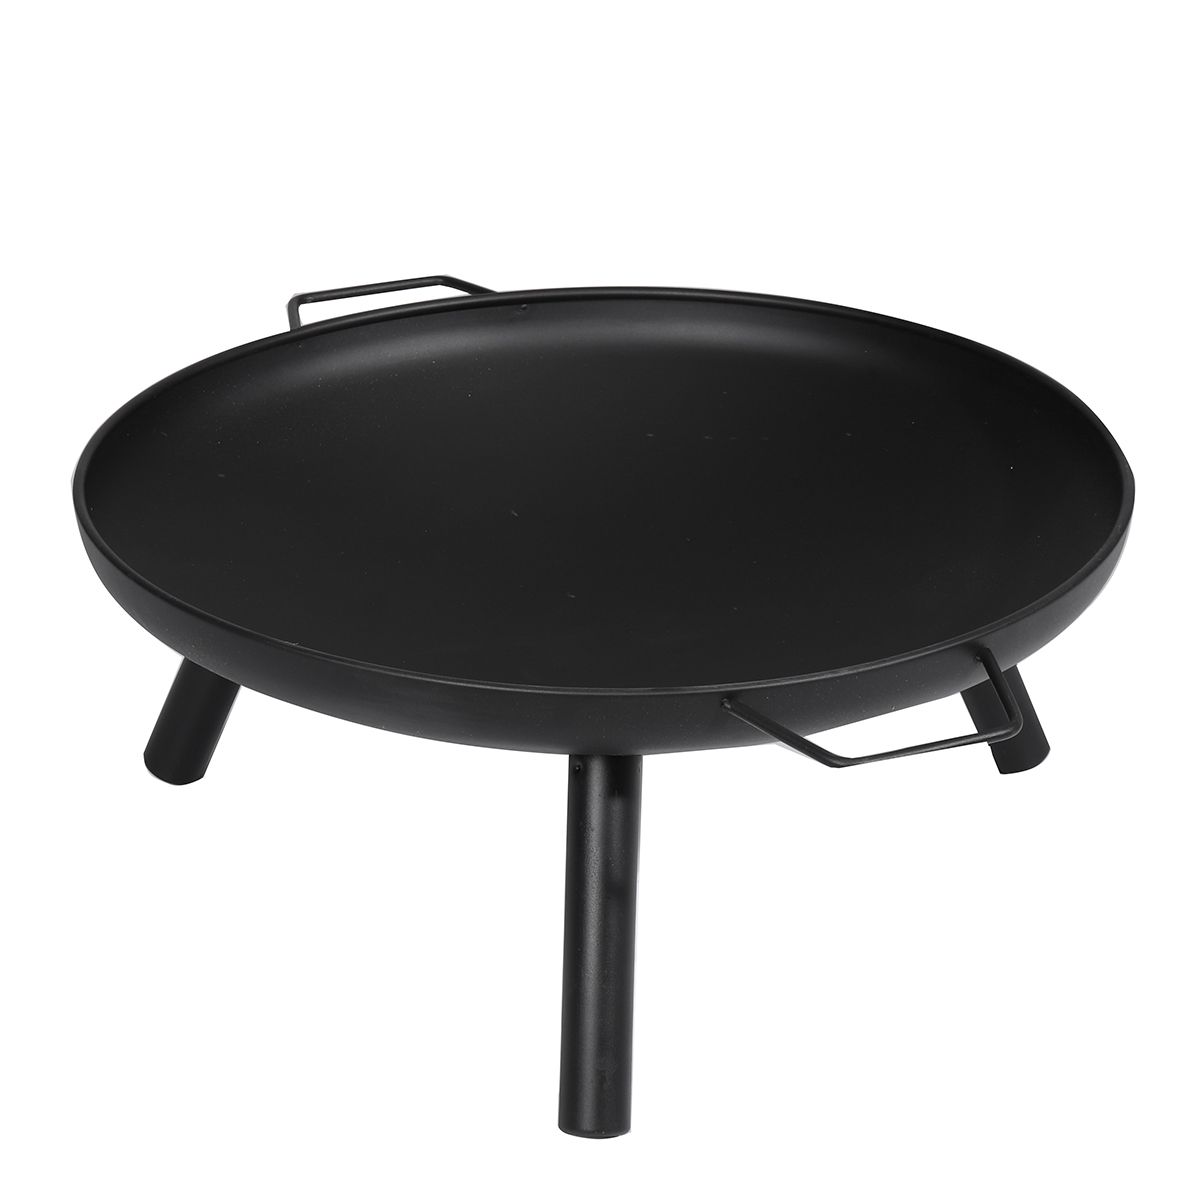 Black-BBQ-Grill-Portable-Charcoal-Outdoor-Camping-Patio-Stove-Barbecue-Tool-1747392